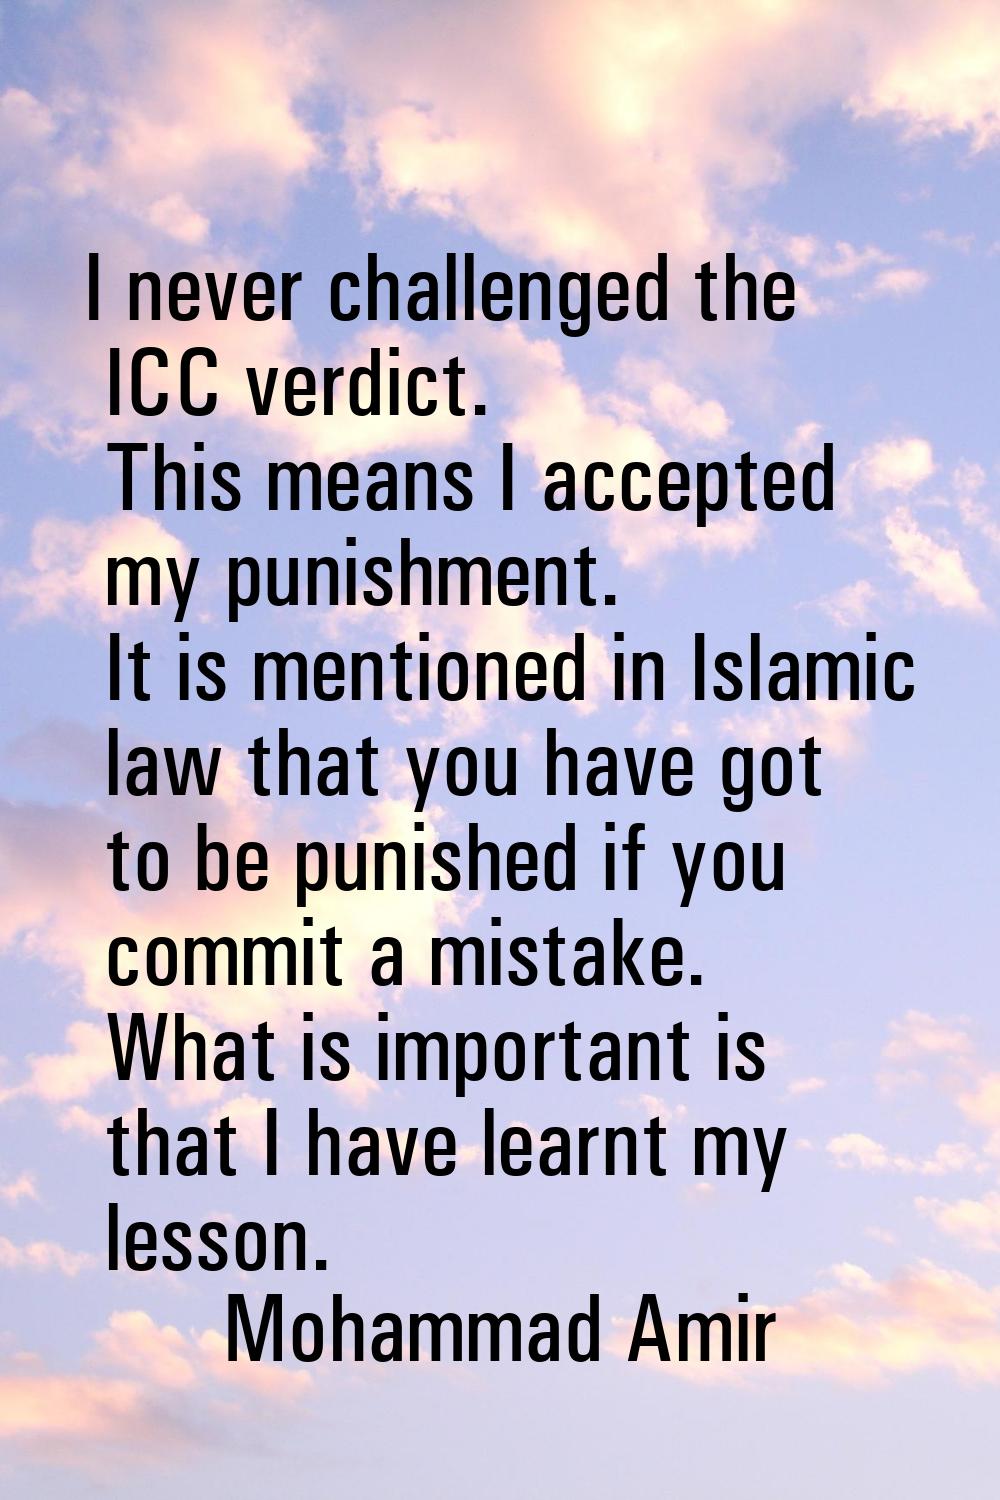 I never challenged the ICC verdict. This means I accepted my punishment. It is mentioned in Islamic